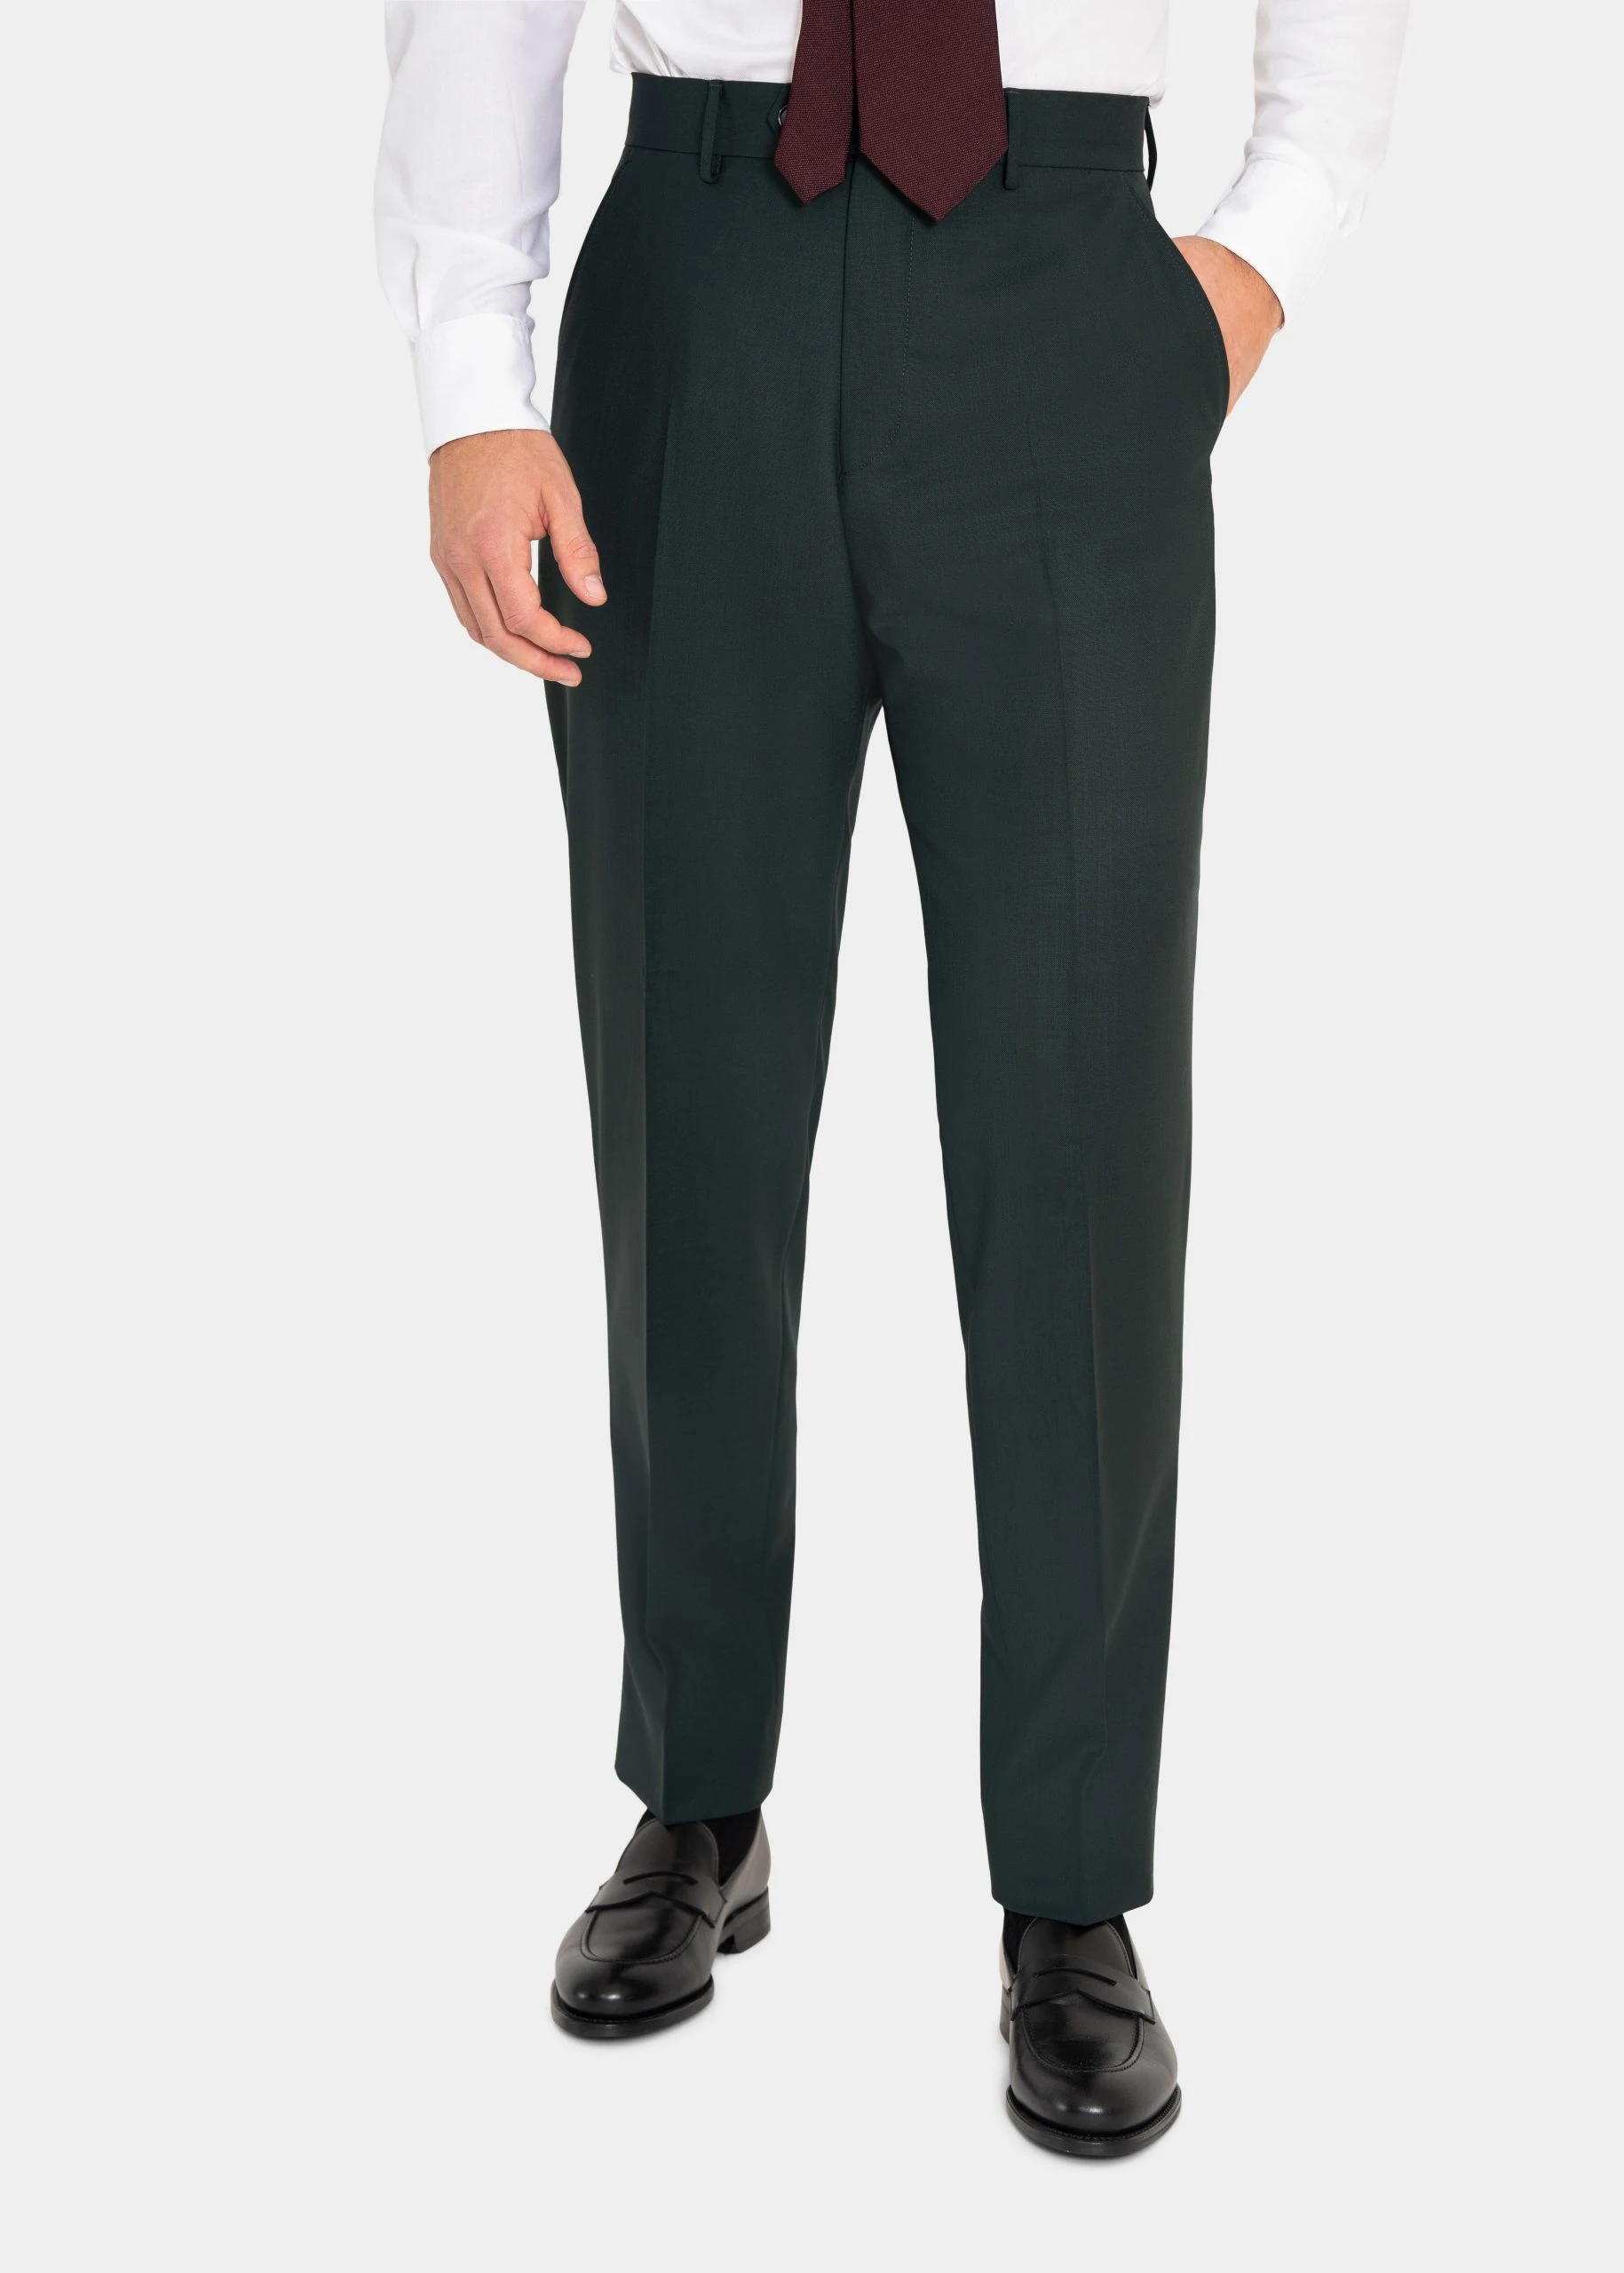 dark green suit trousers in twistair fabric